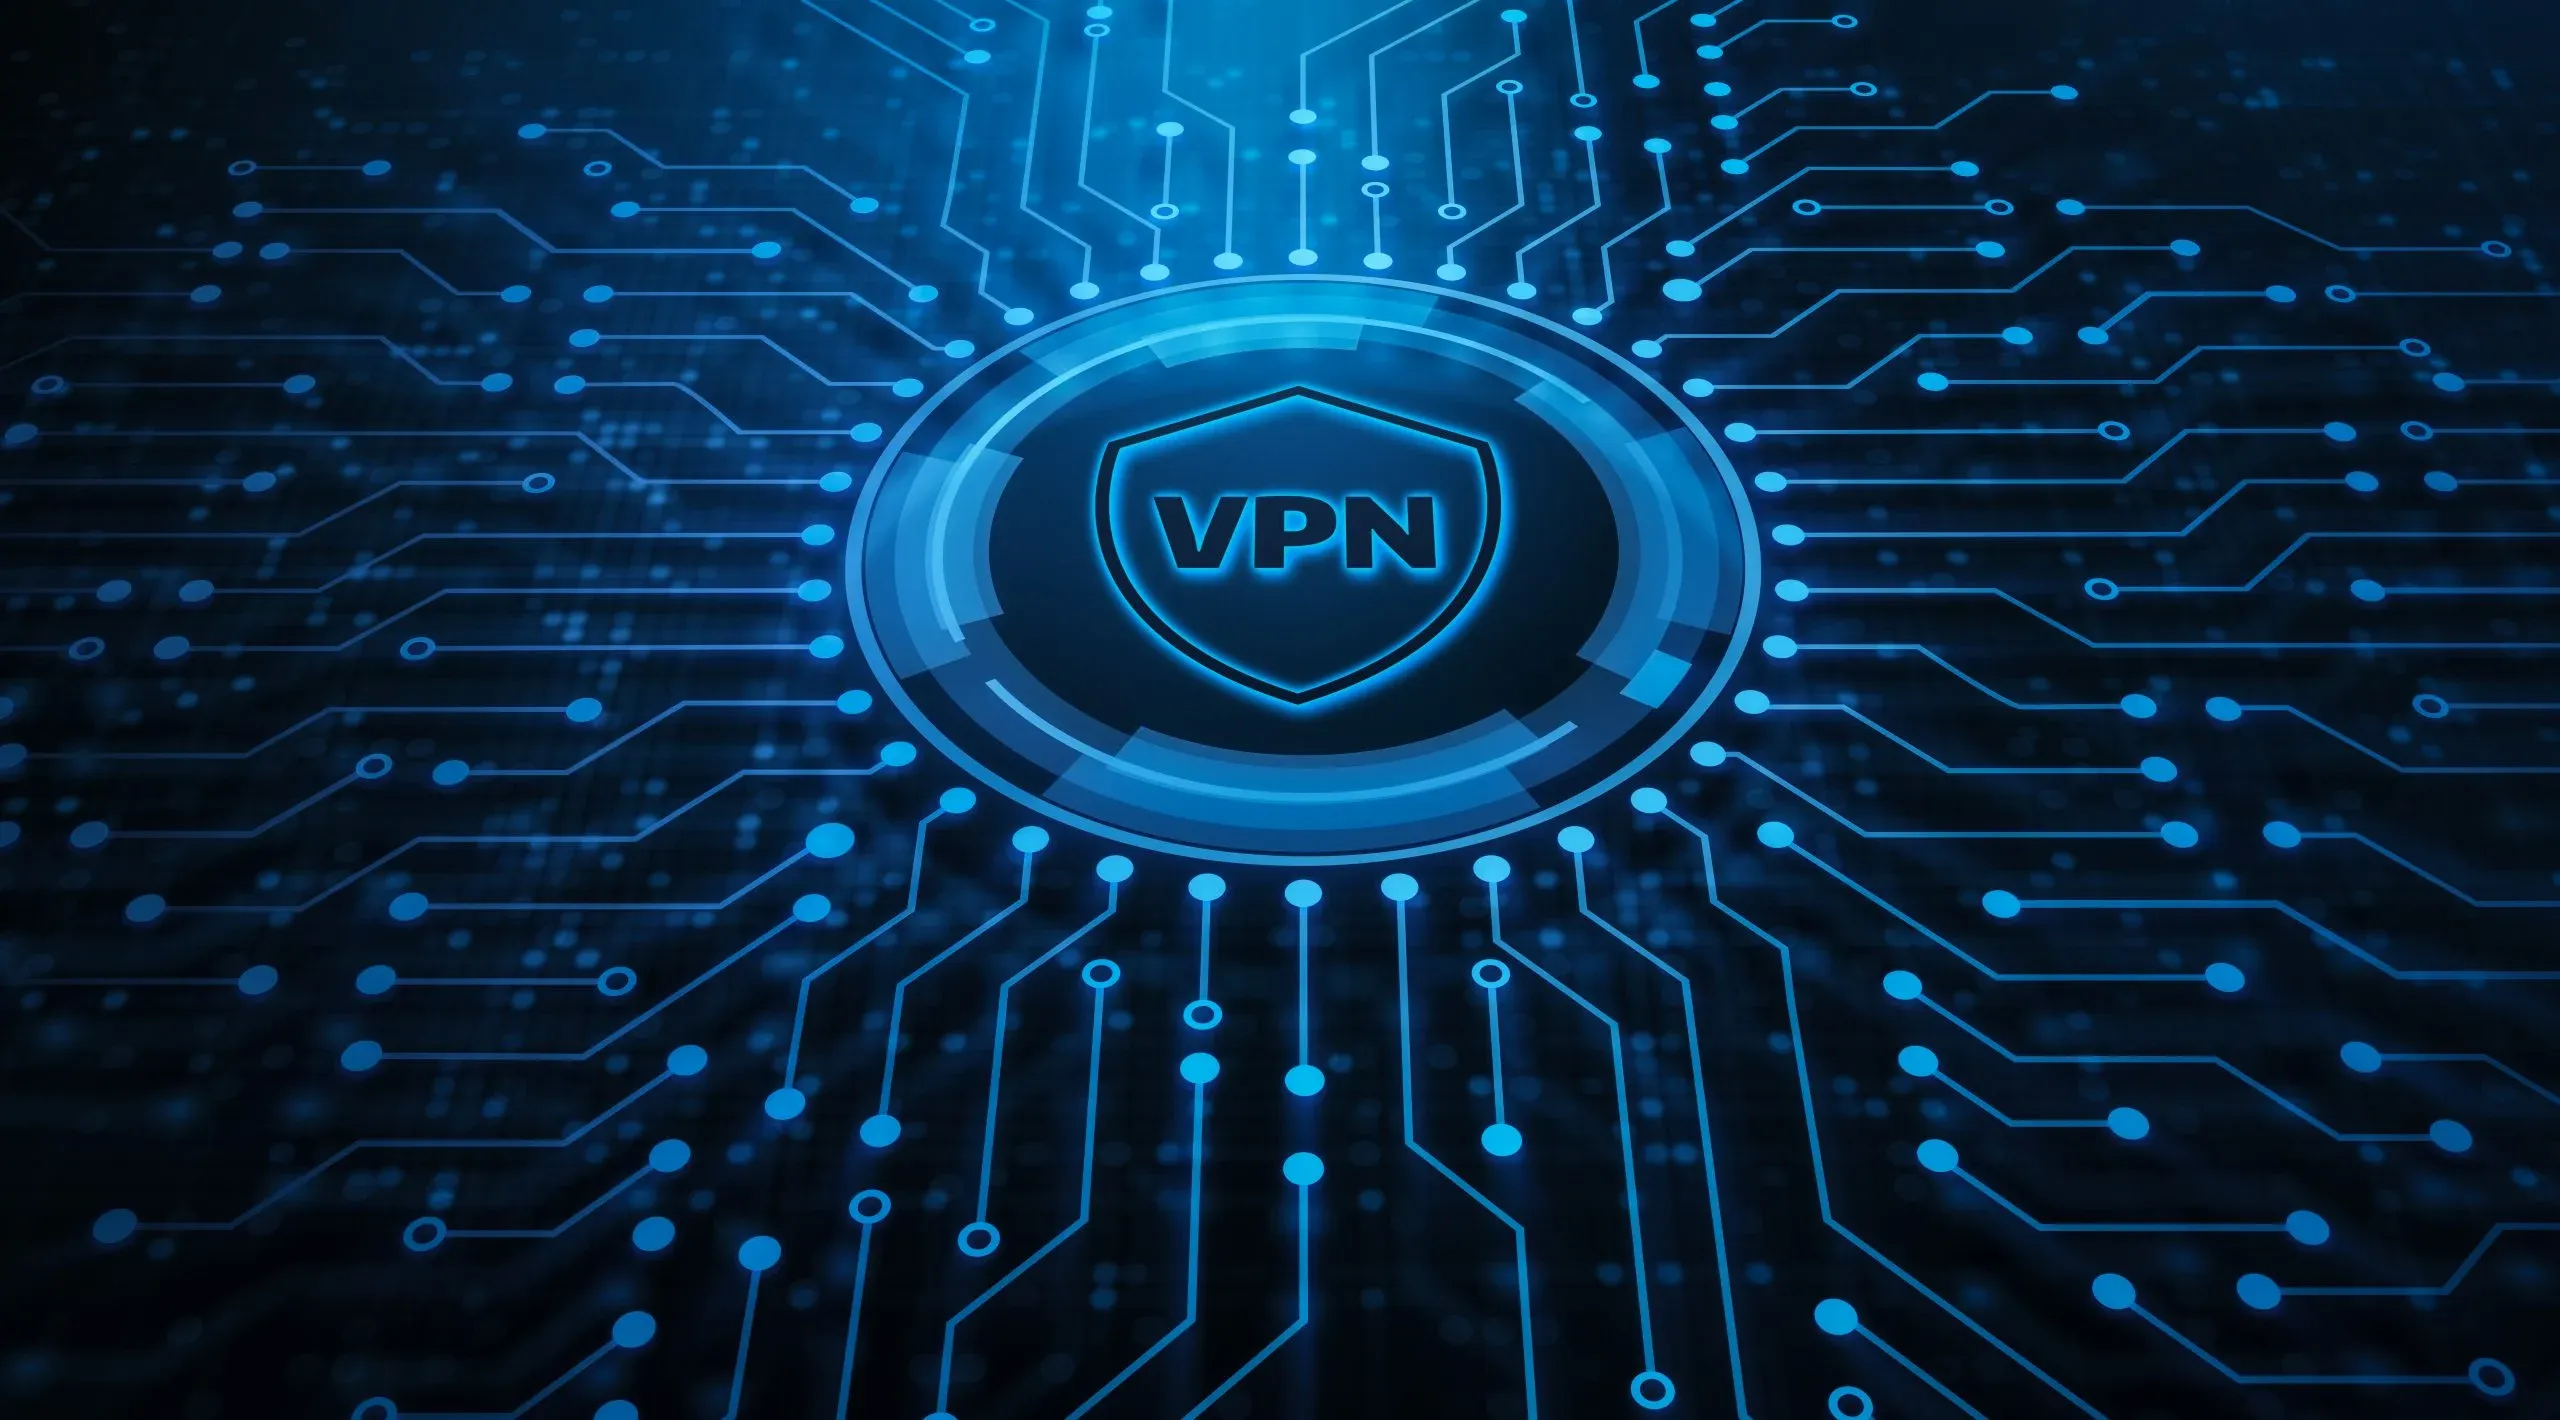 Windows VPN: Access and Security in a Digital Realm